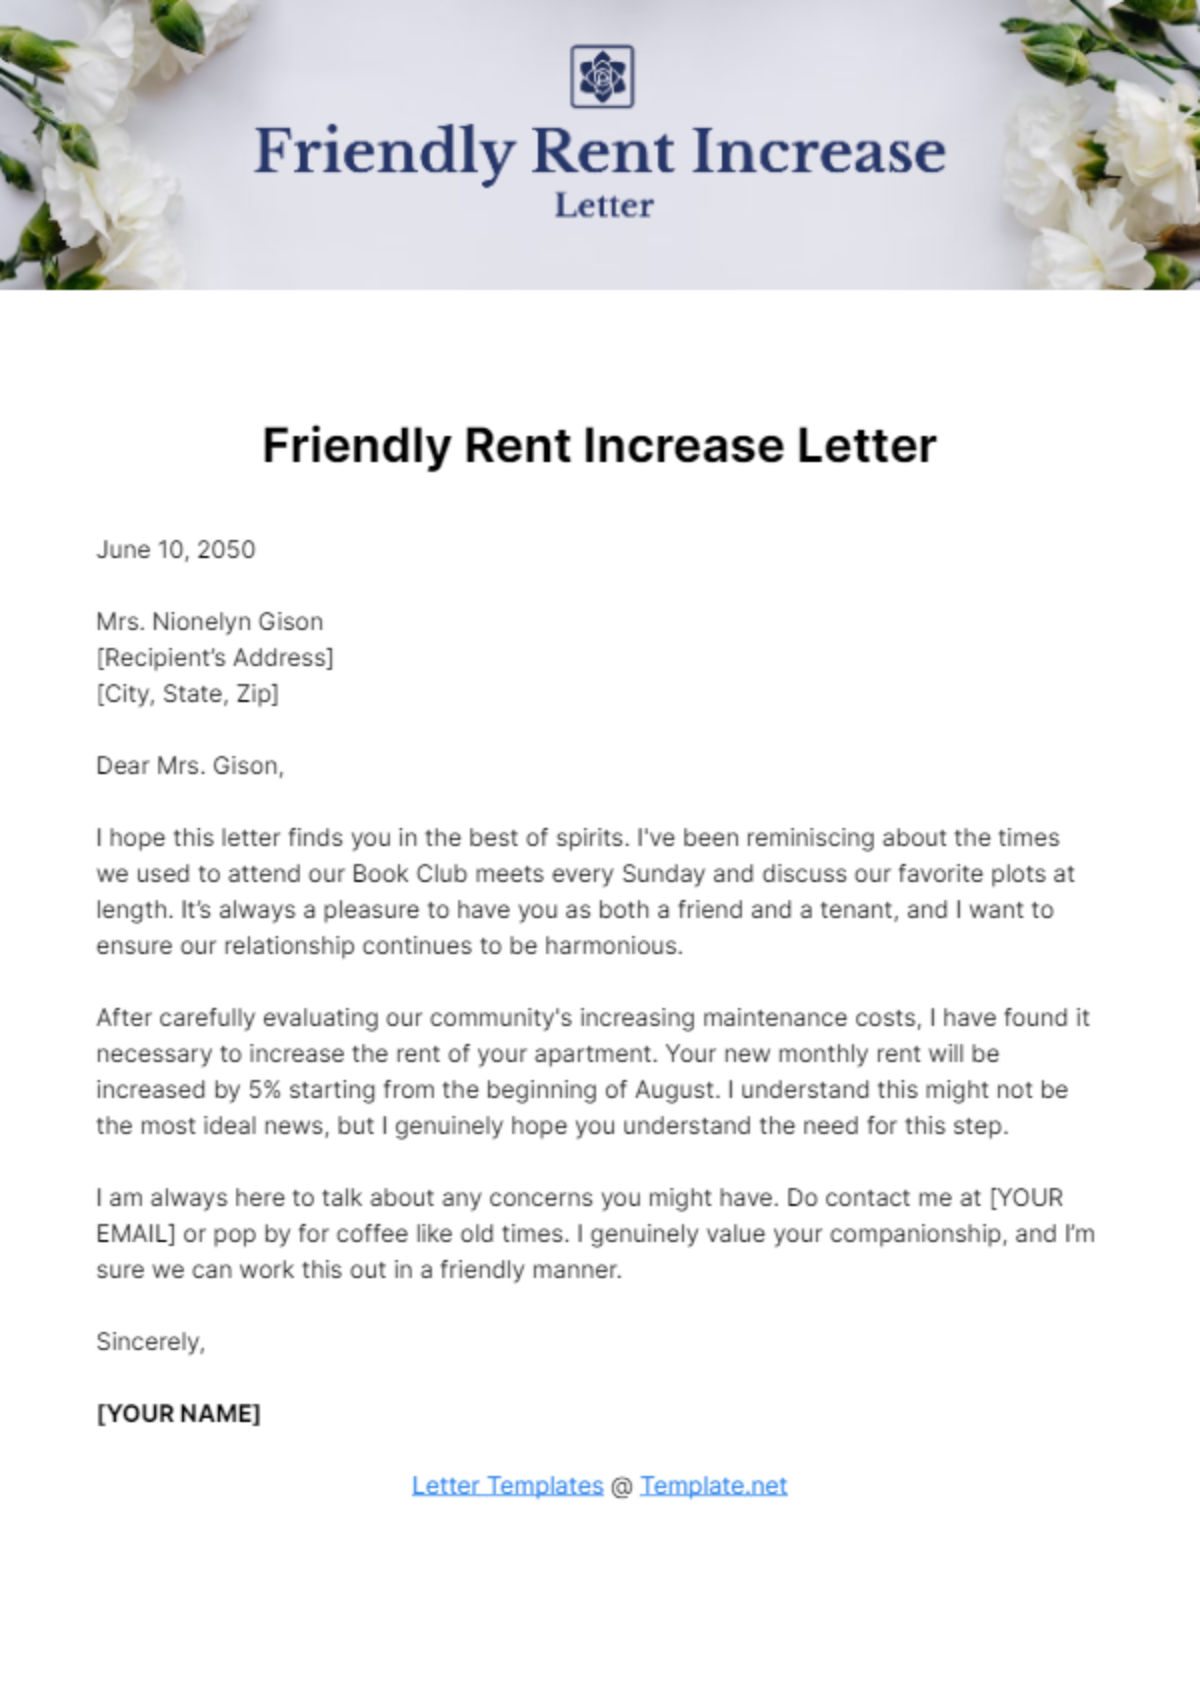 Free Friendly Rent Increase Letter Template